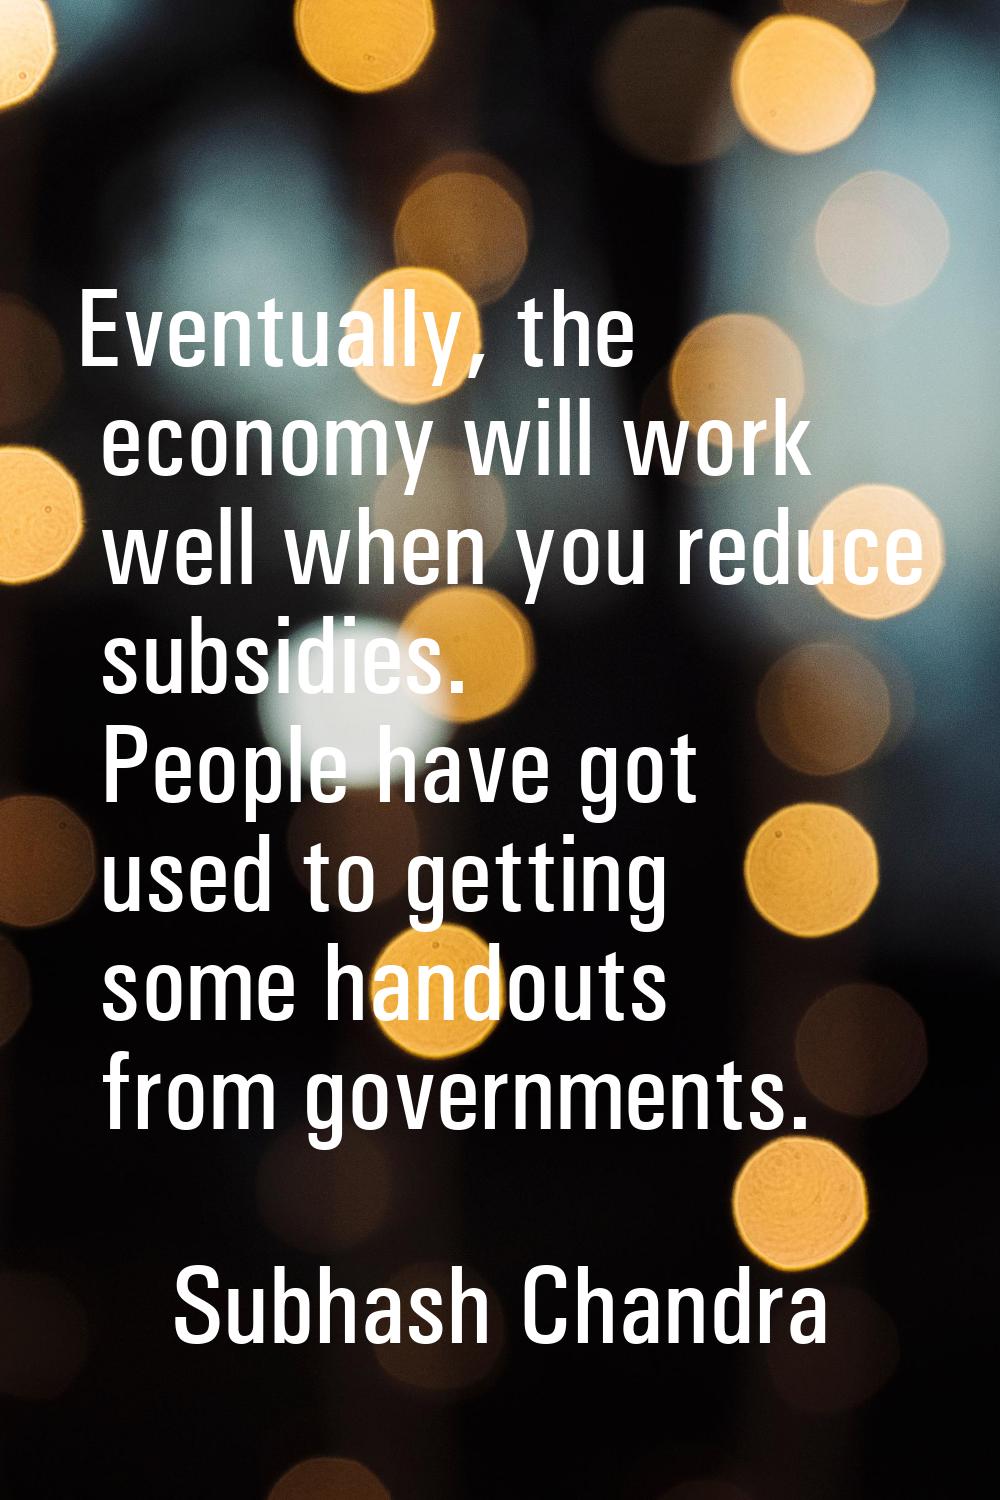 Eventually, the economy will work well when you reduce subsidies. People have got used to getting s